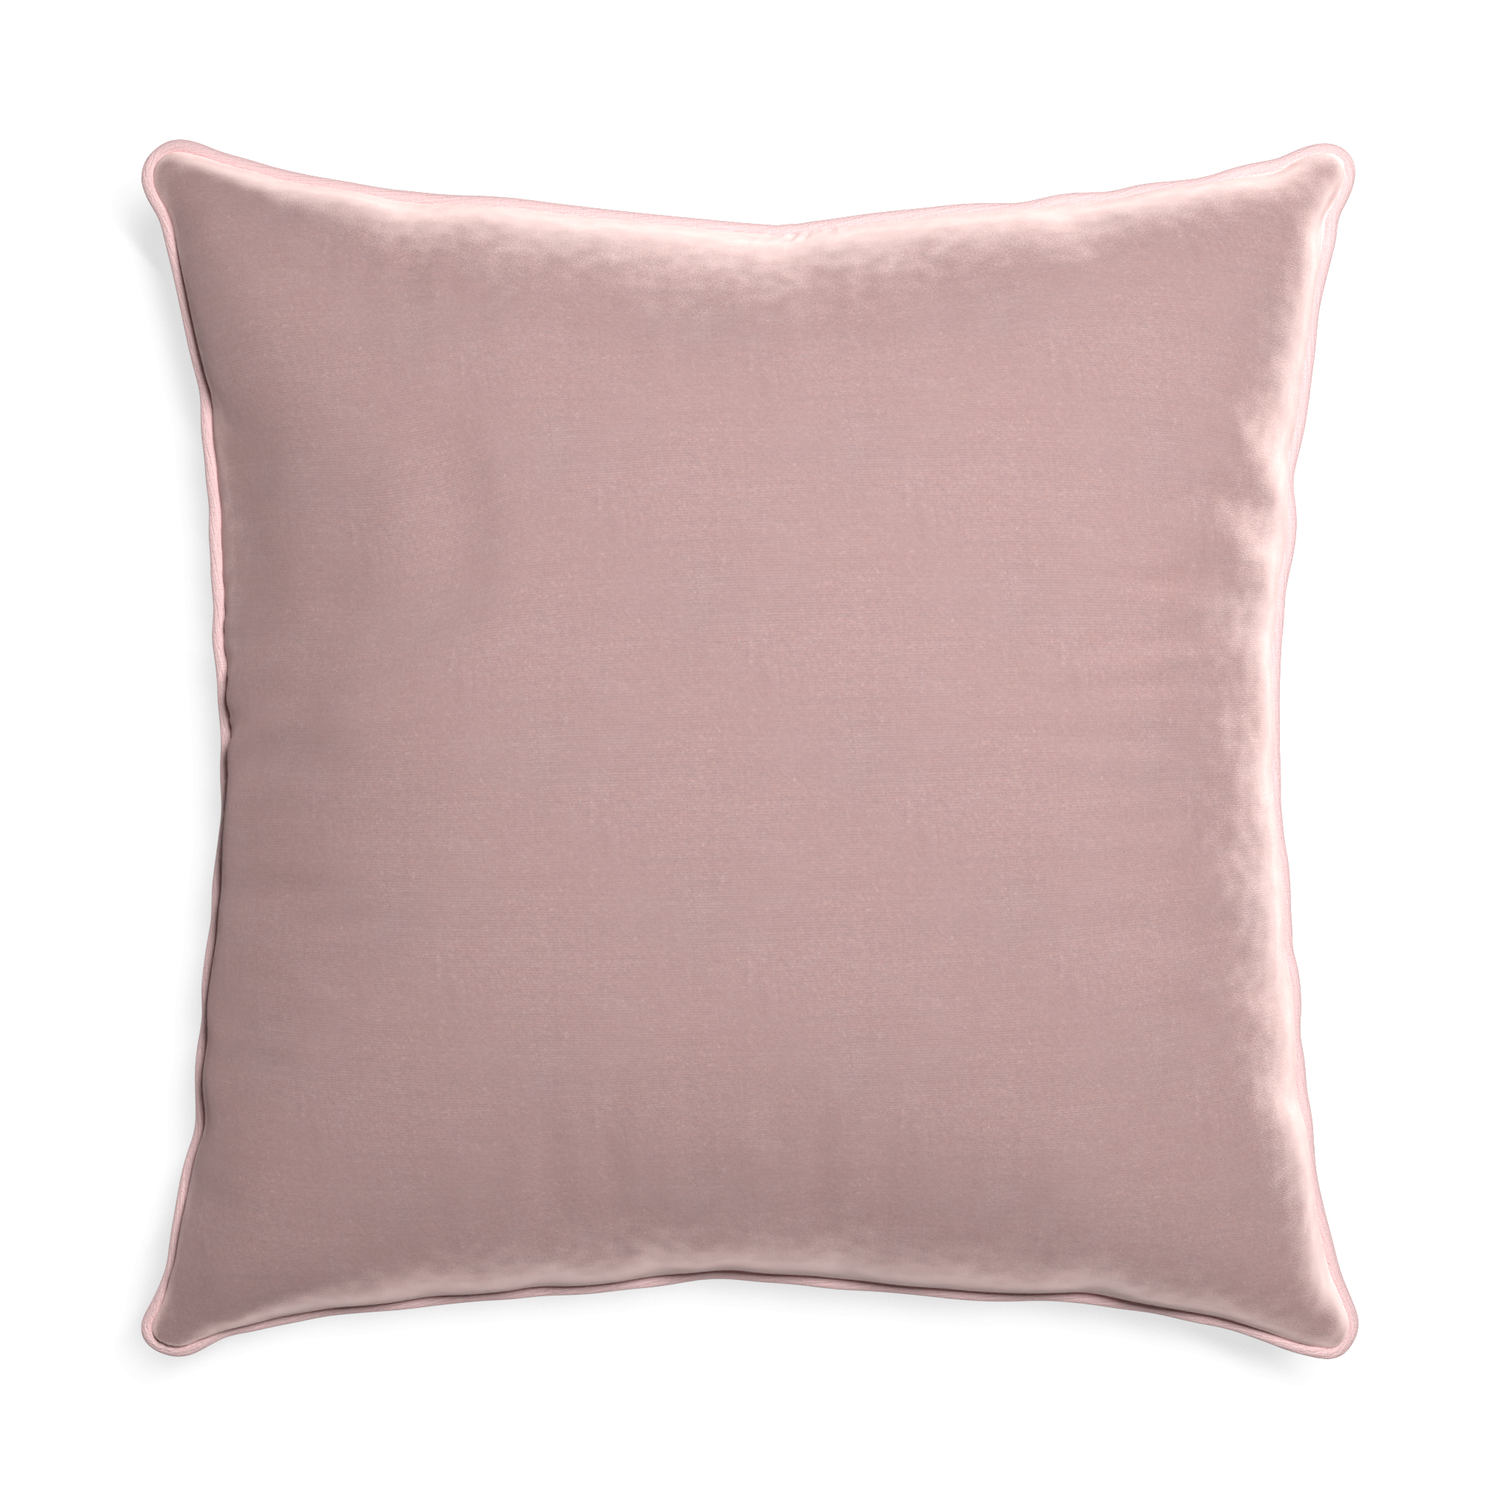 square mauve velvet pillow with light pink piping